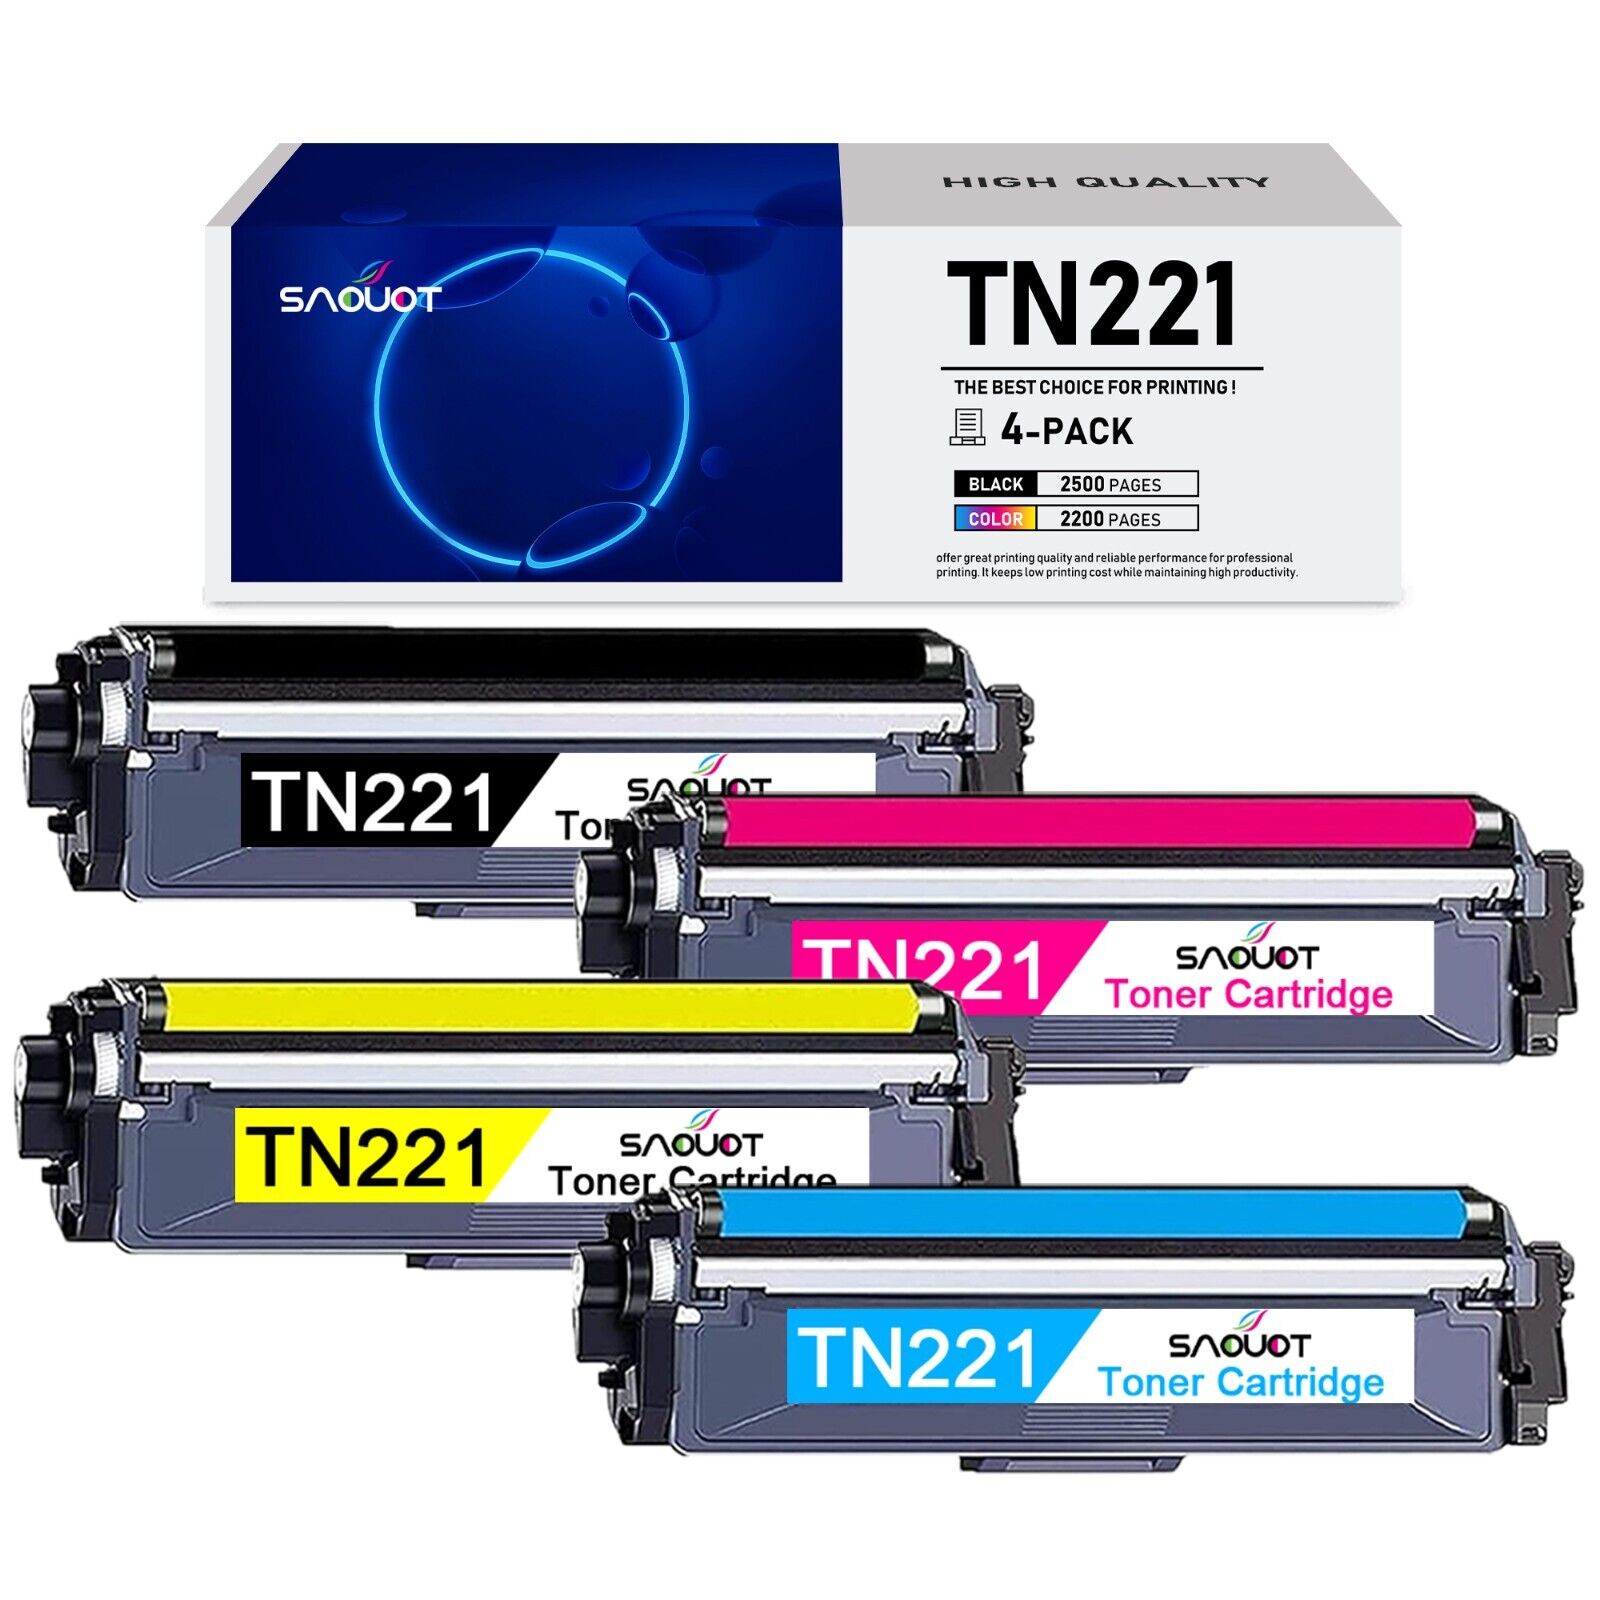 TN221 Toner Cartridges Replacement for Brother HL-3170CDW HL-3180CDW MFC-9130CW